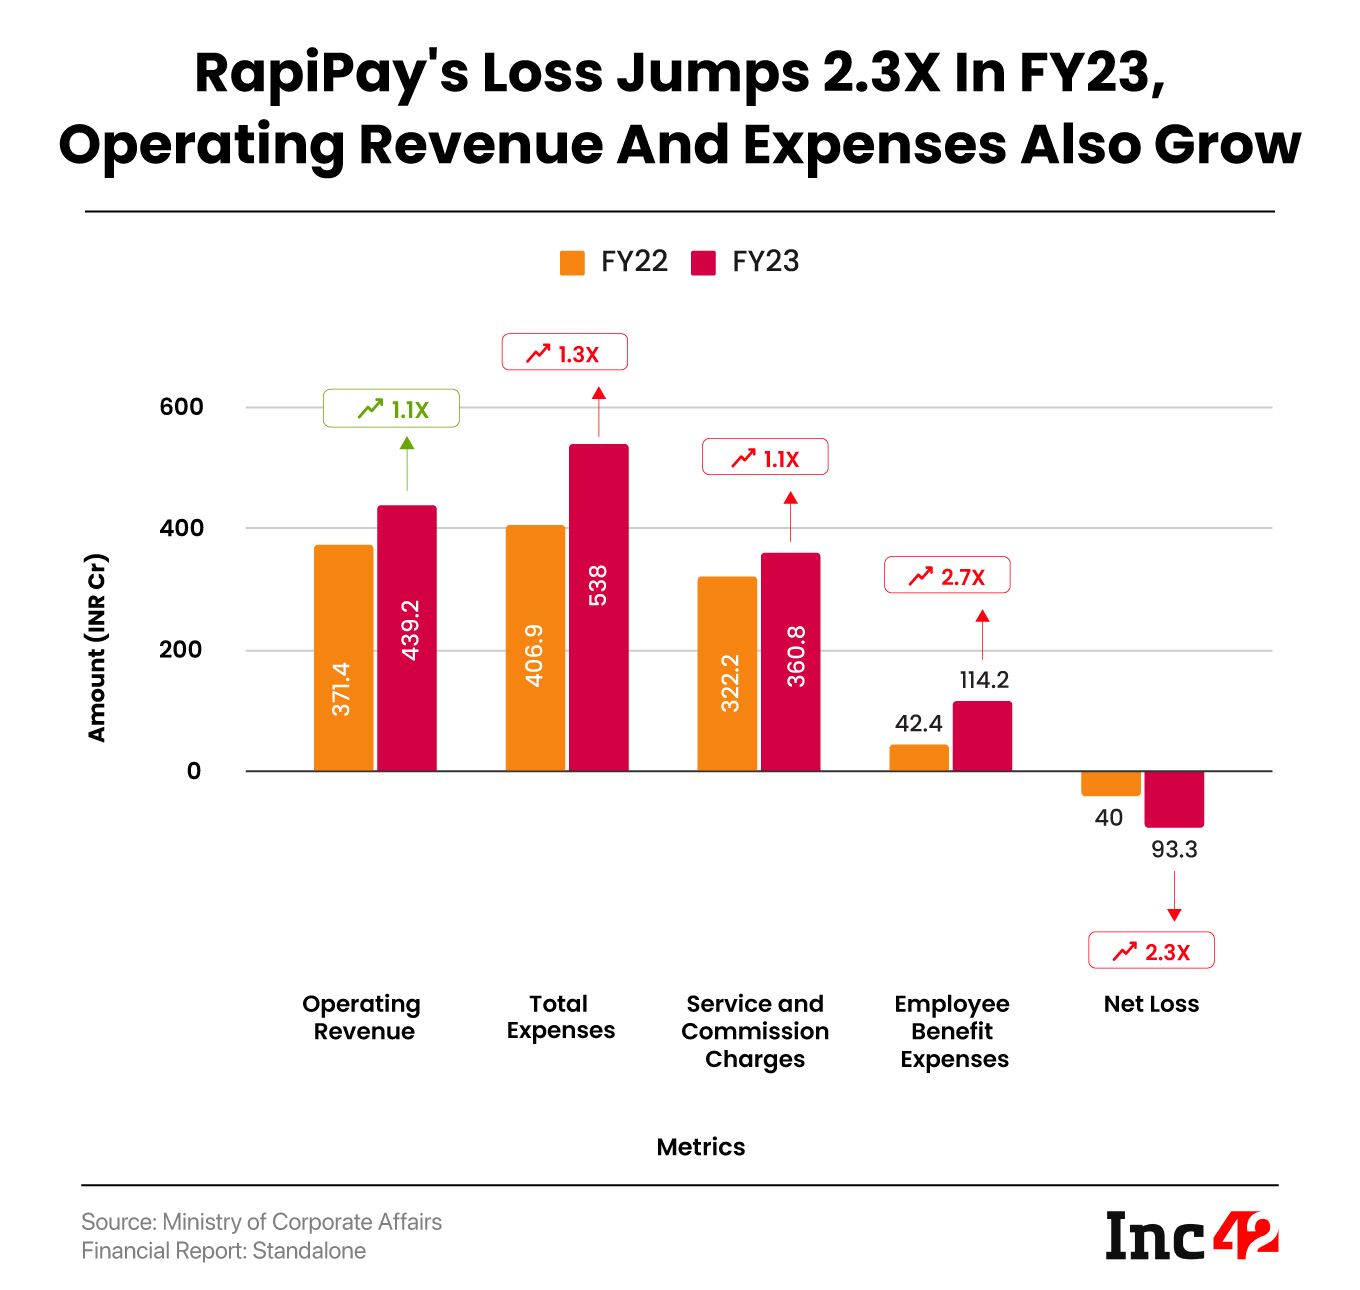 RapiPay's Loss Jumps 2.3X In FY23, Operating Revenue And Expenses Also Grow